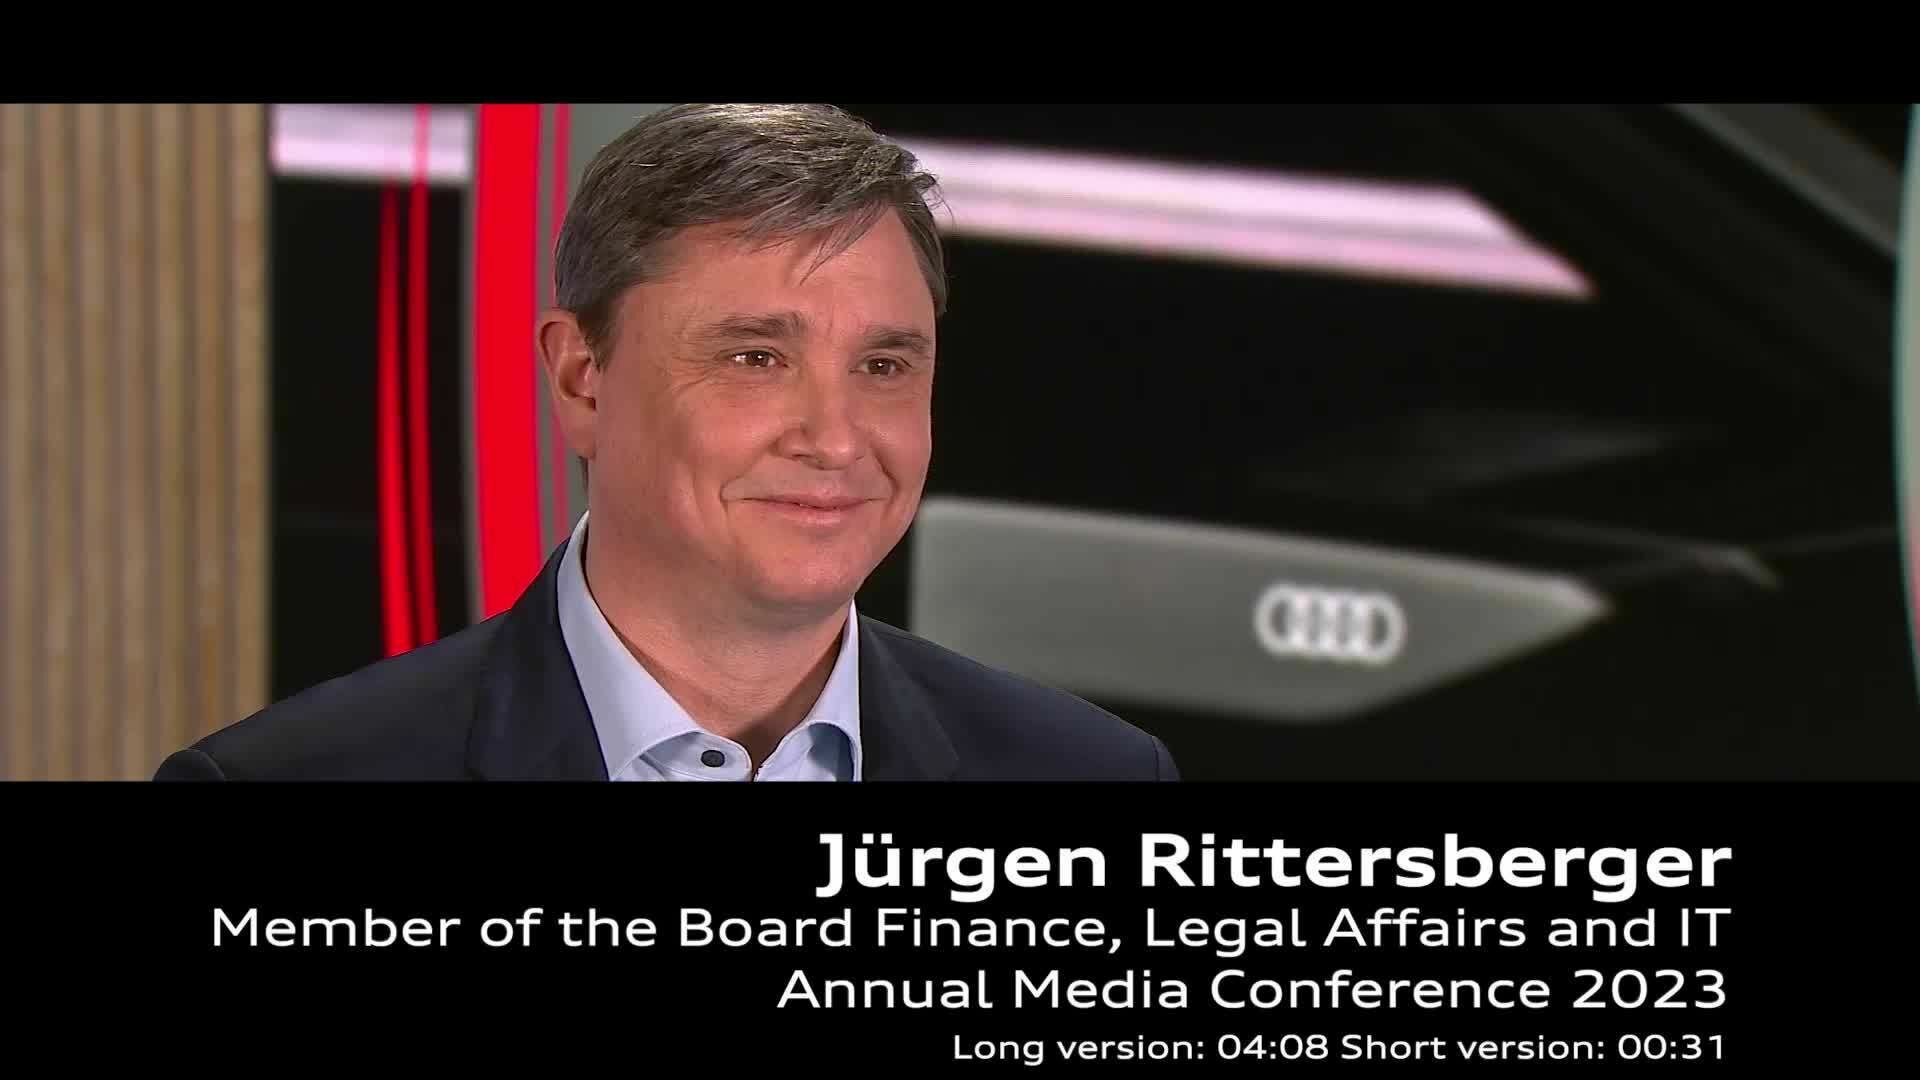 Footage: Statement from Jürgen Rittersberger at the Audi Annual Media Conference 2023